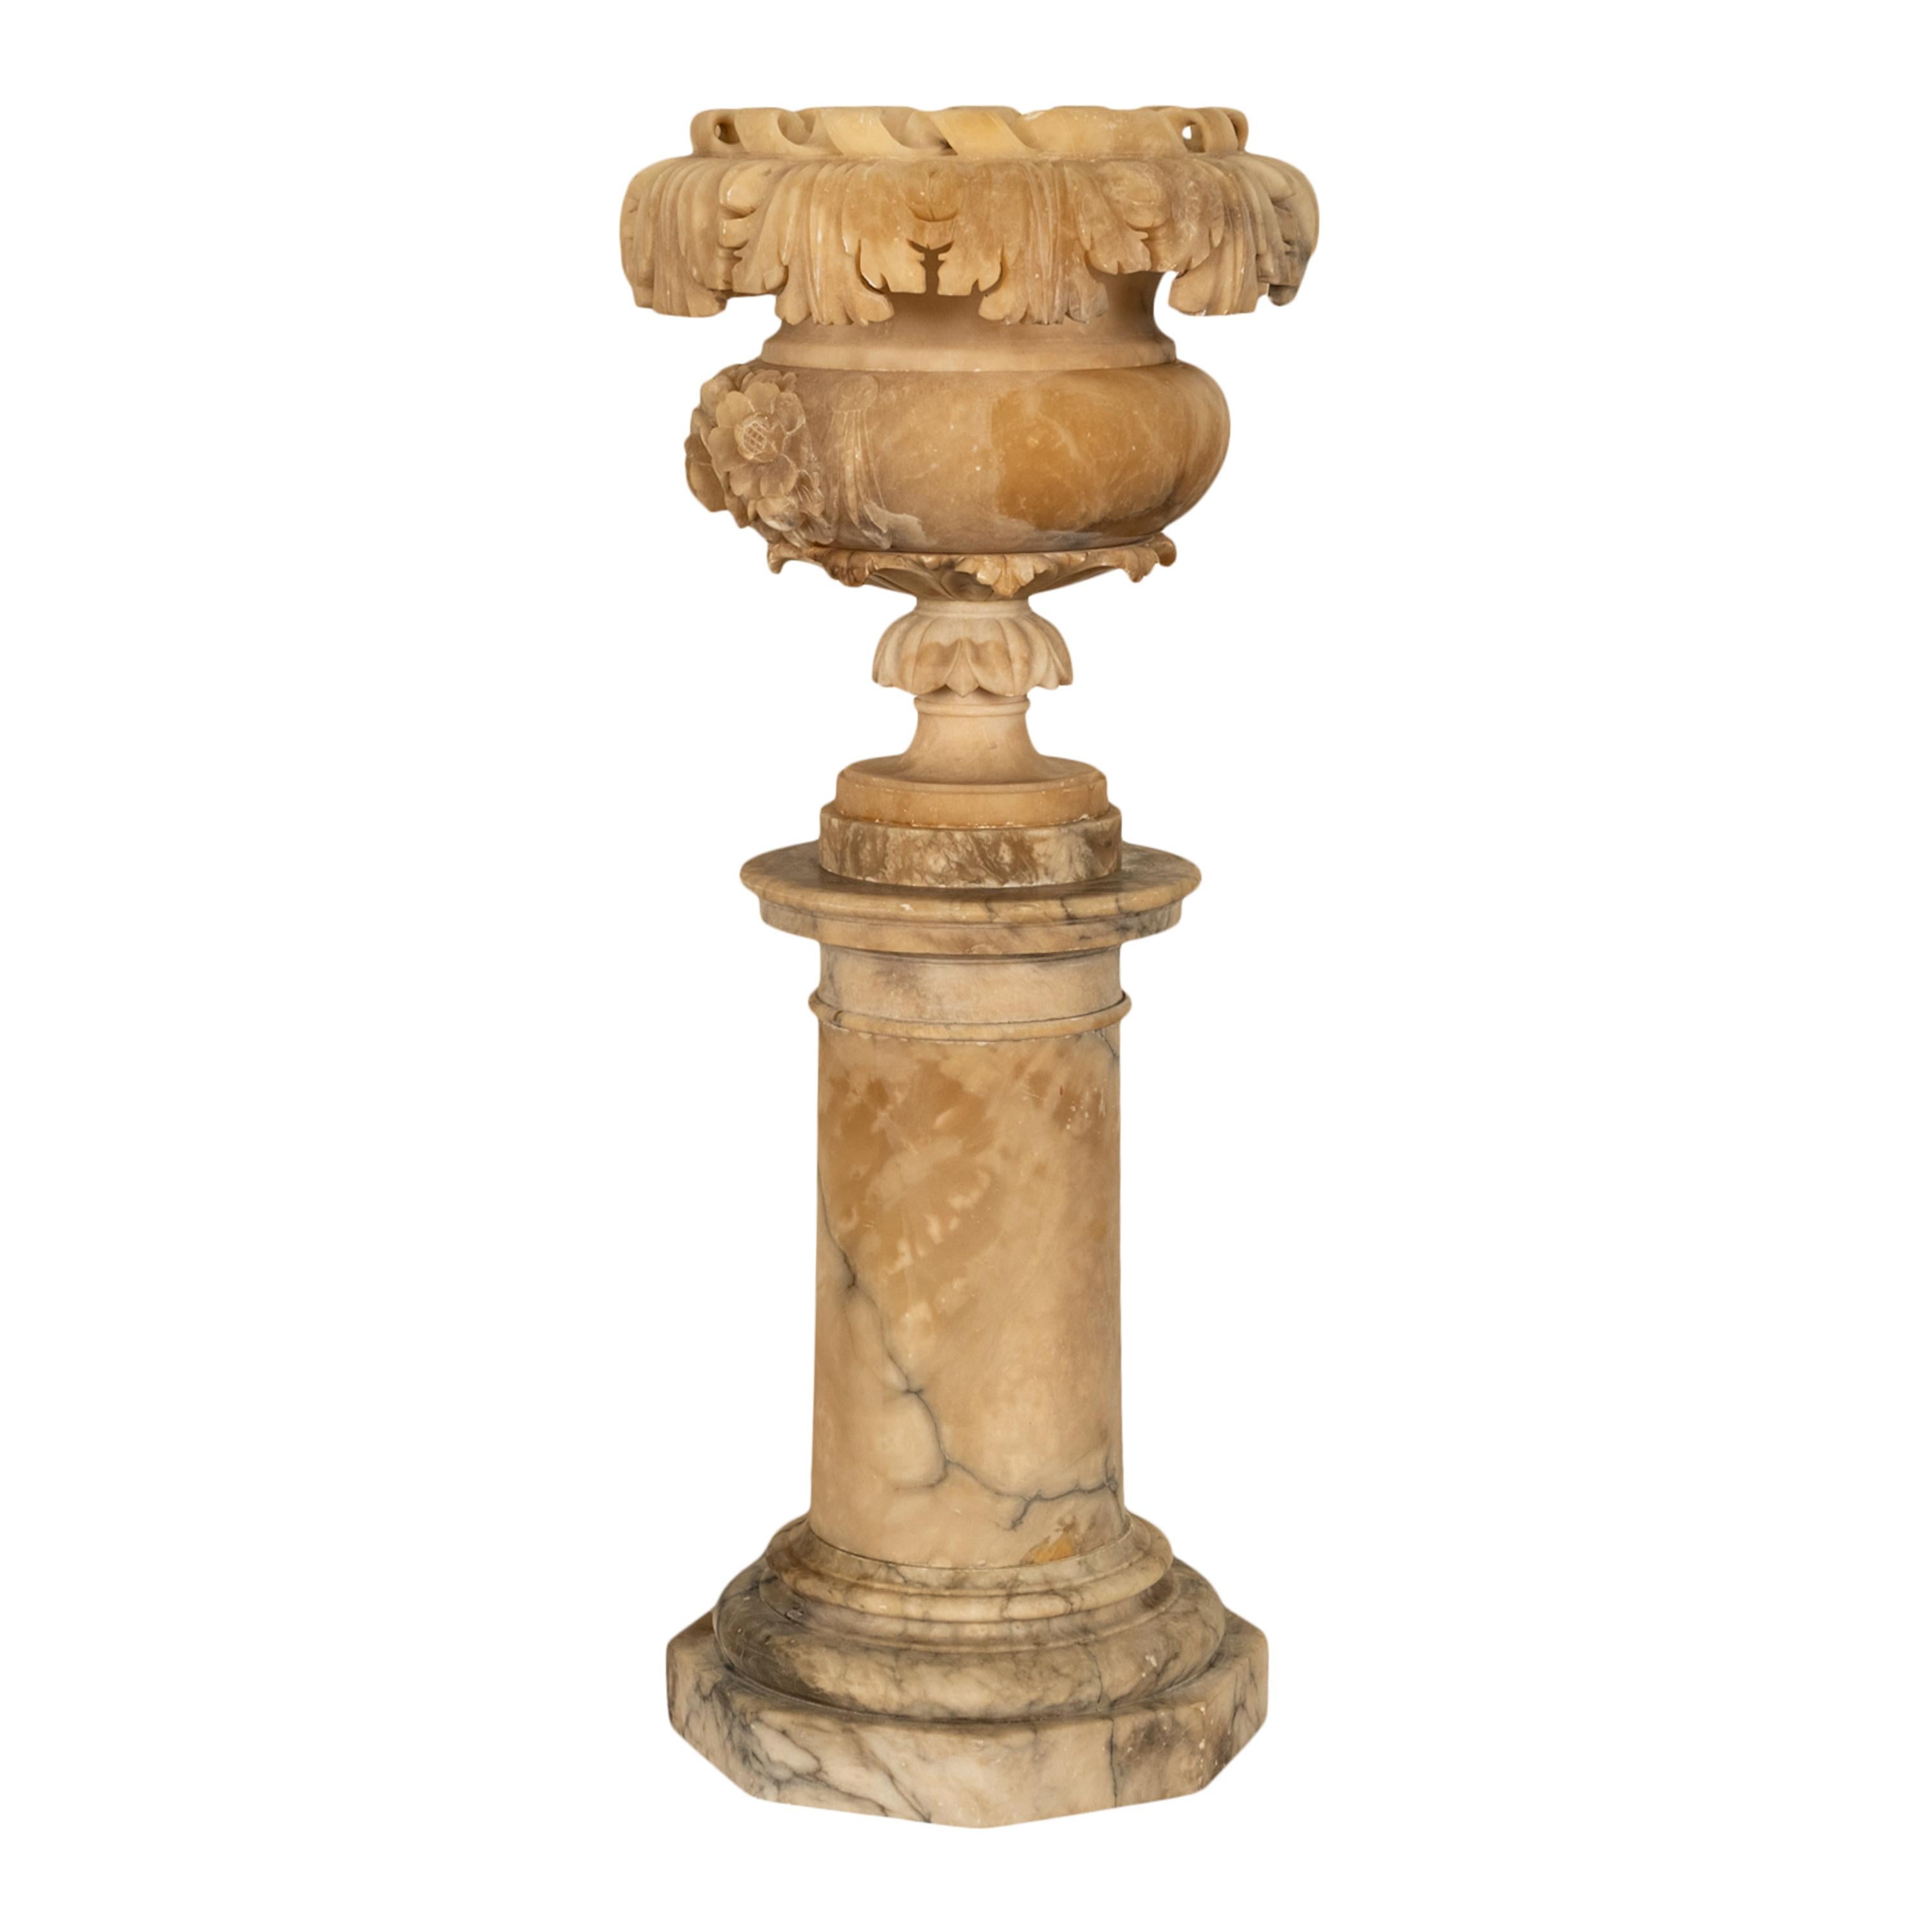 Antique 19th Century Italian Carved Alabaster Neoclassical Urn on Pedestal 1850 In Good Condition For Sale In Portland, OR